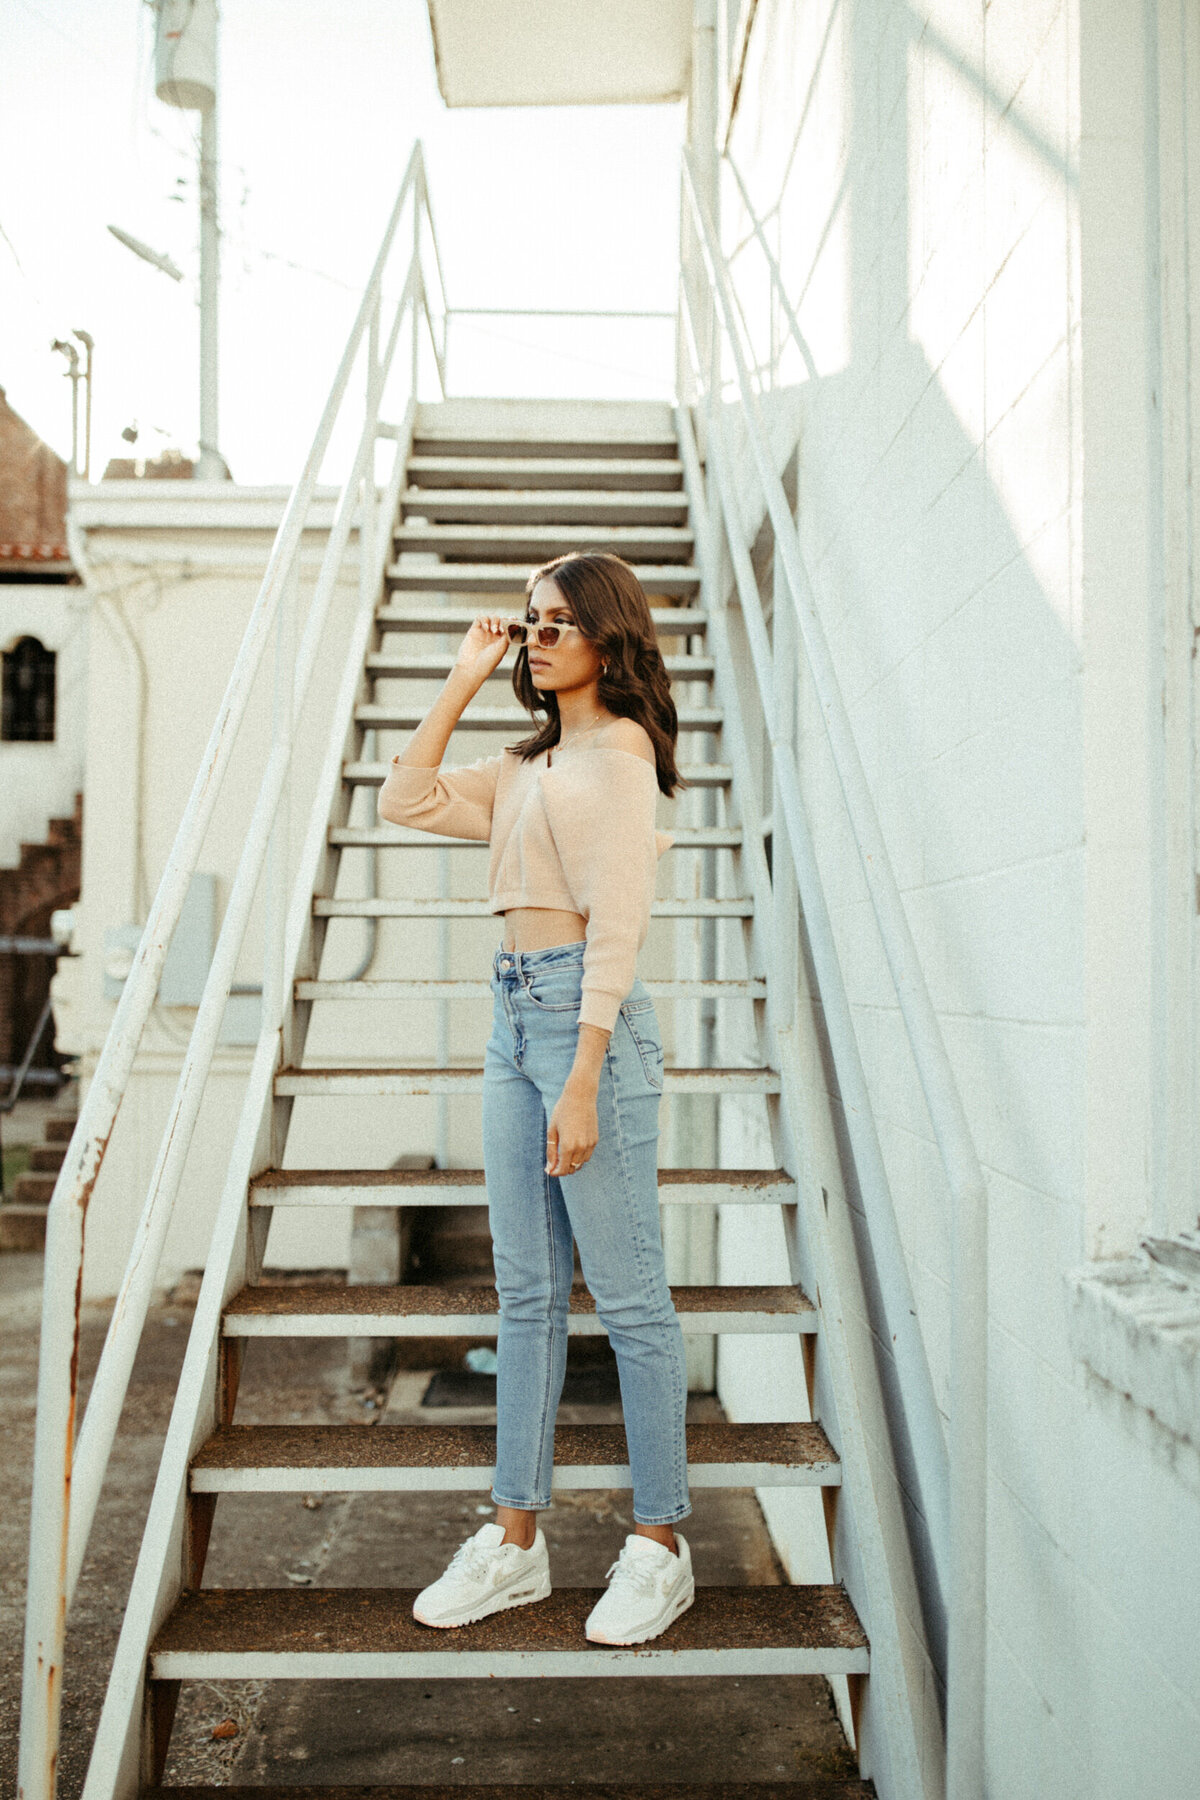 High school senior girl with vintage style wearing sunglasses and standing on a staircase downtown